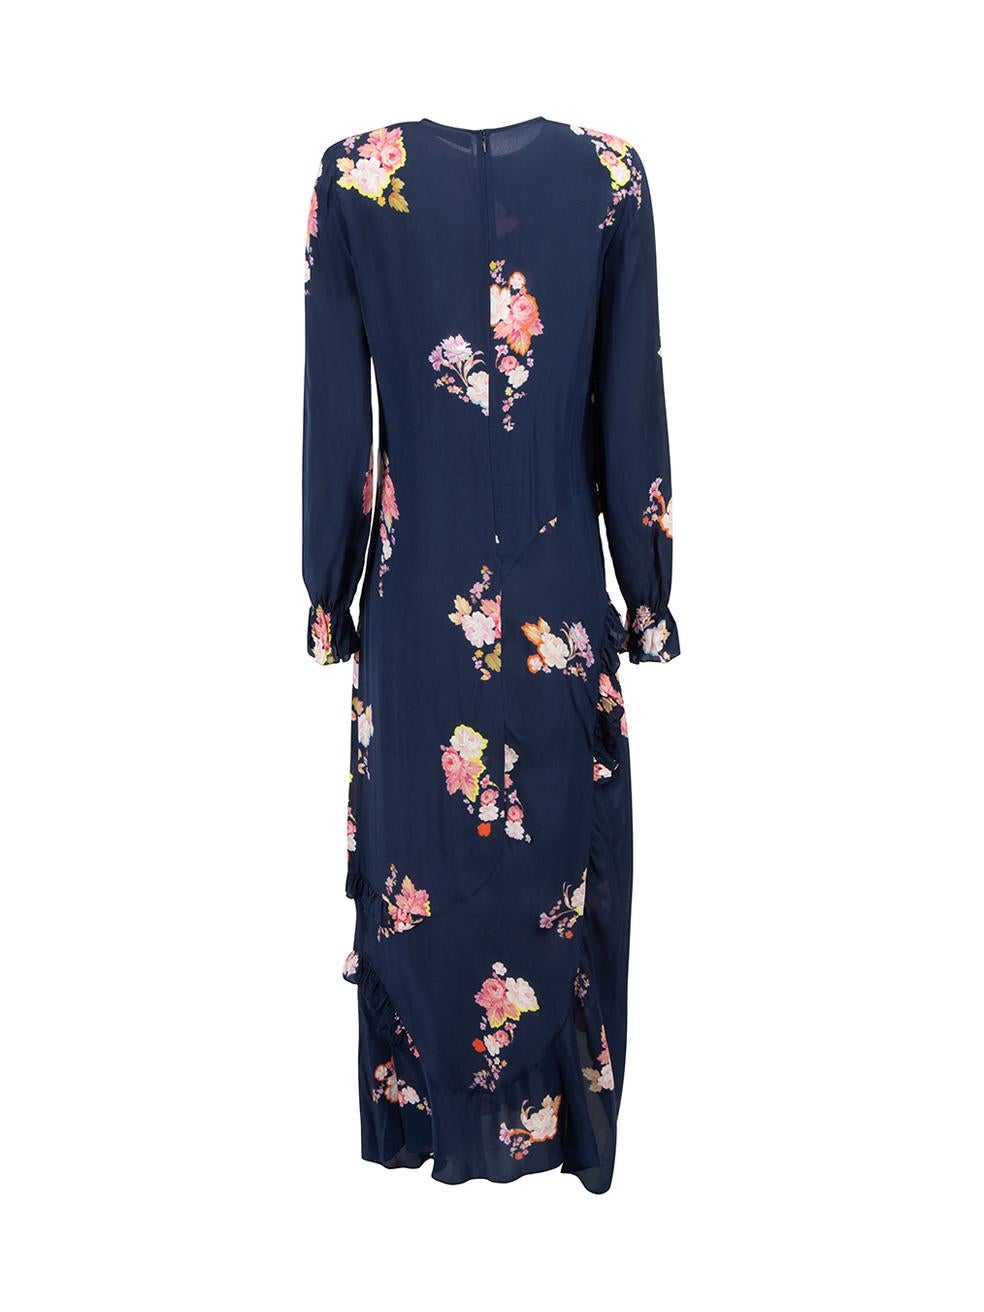 Preen Line Navy Floral Print Ruffles Accent Maxi Dress Size XS In New Condition For Sale In London, GB